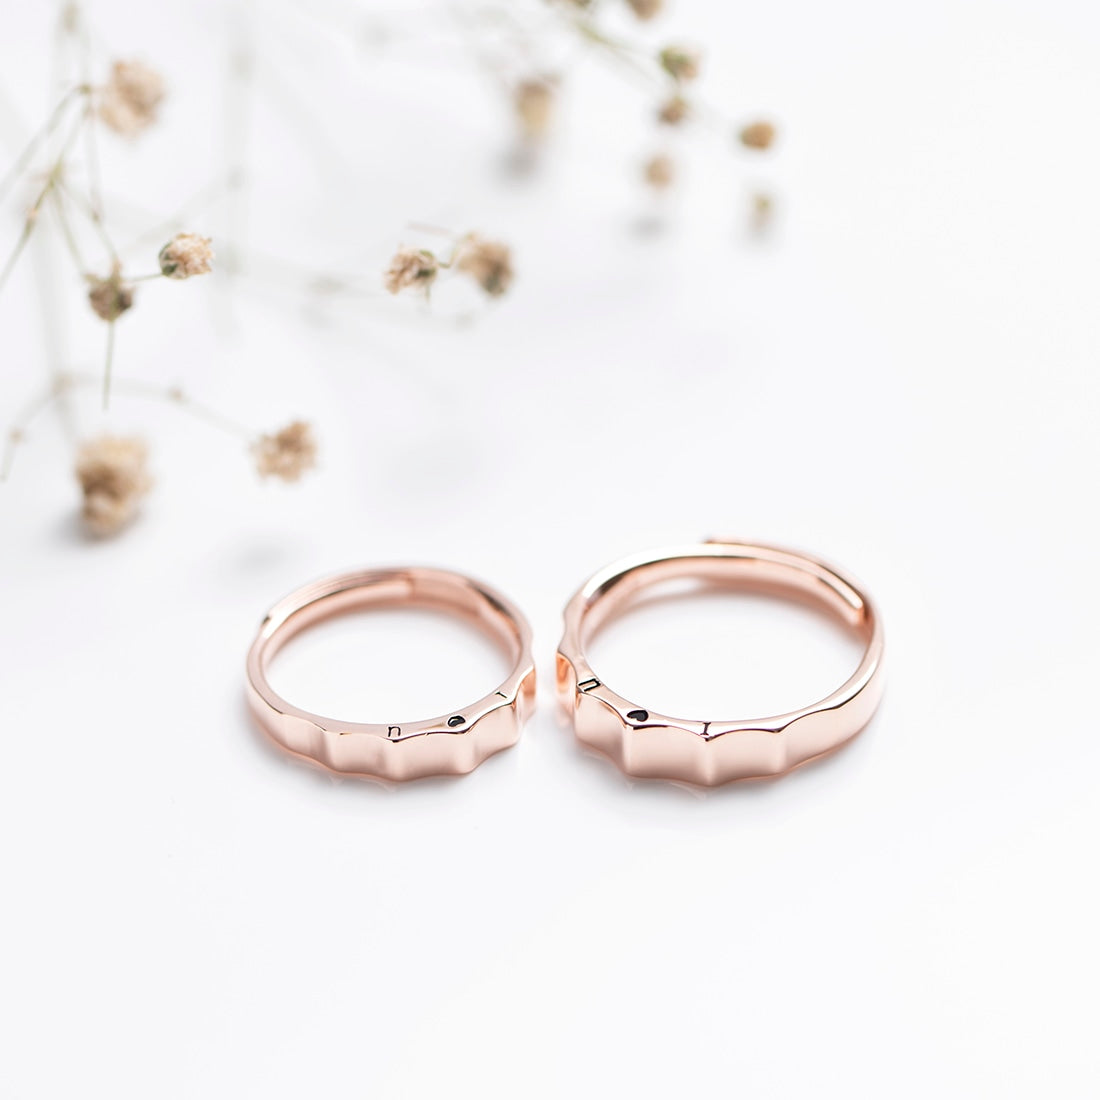 Minimal Rose Gold Plated 925 Sterling Silver Couple Ring Band (Adjustable)